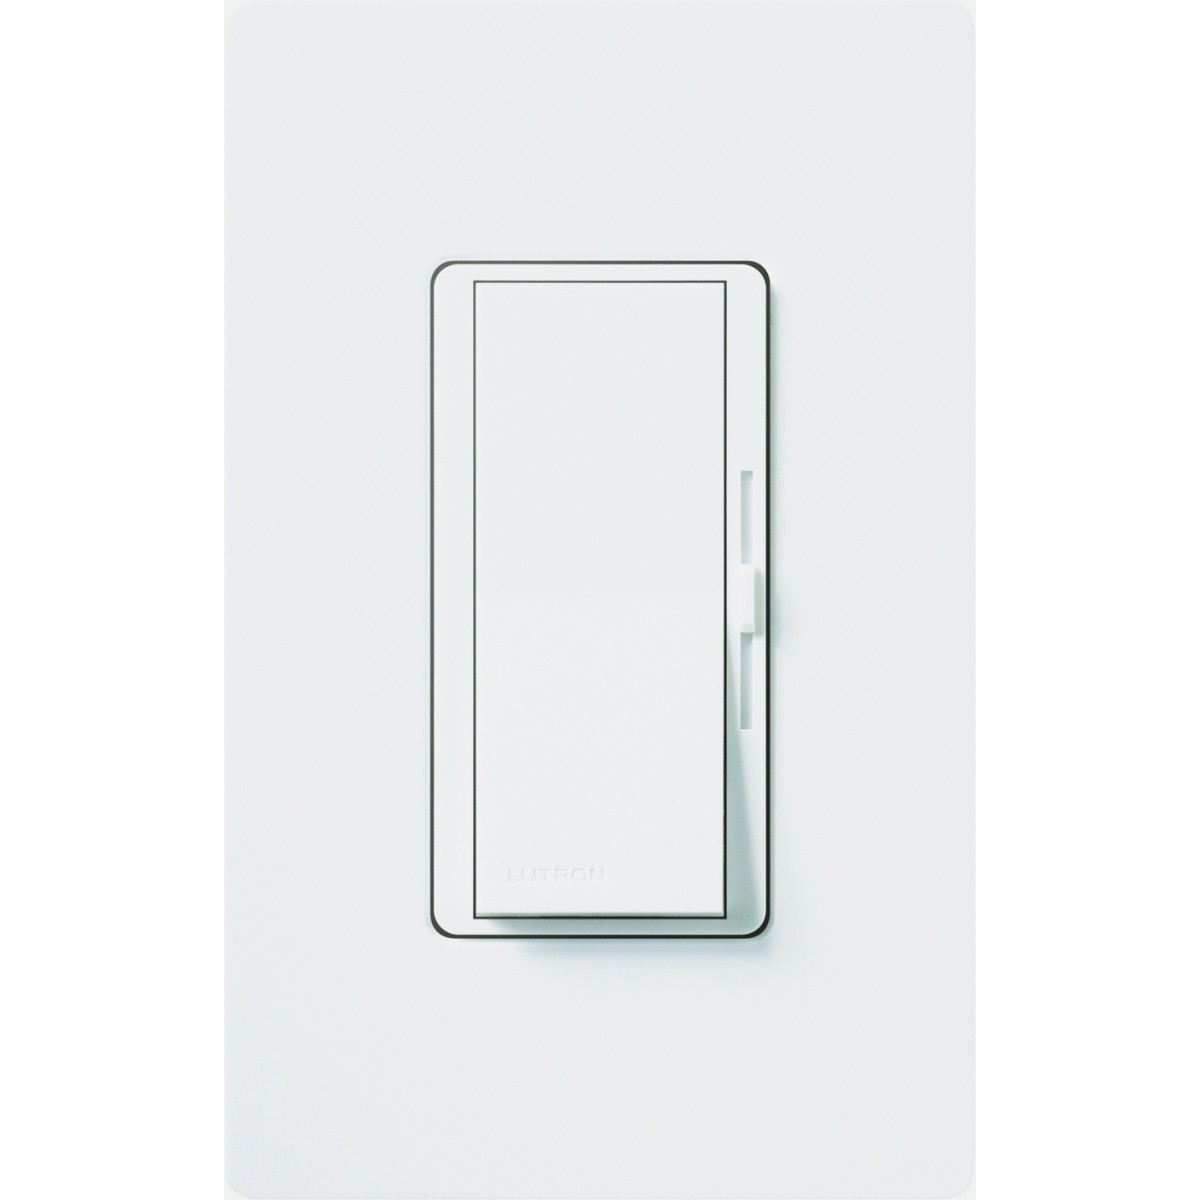 Diva 600W(INC)150W(CFL or LED screw-base)Dimmer & Paddle Switch/3-way